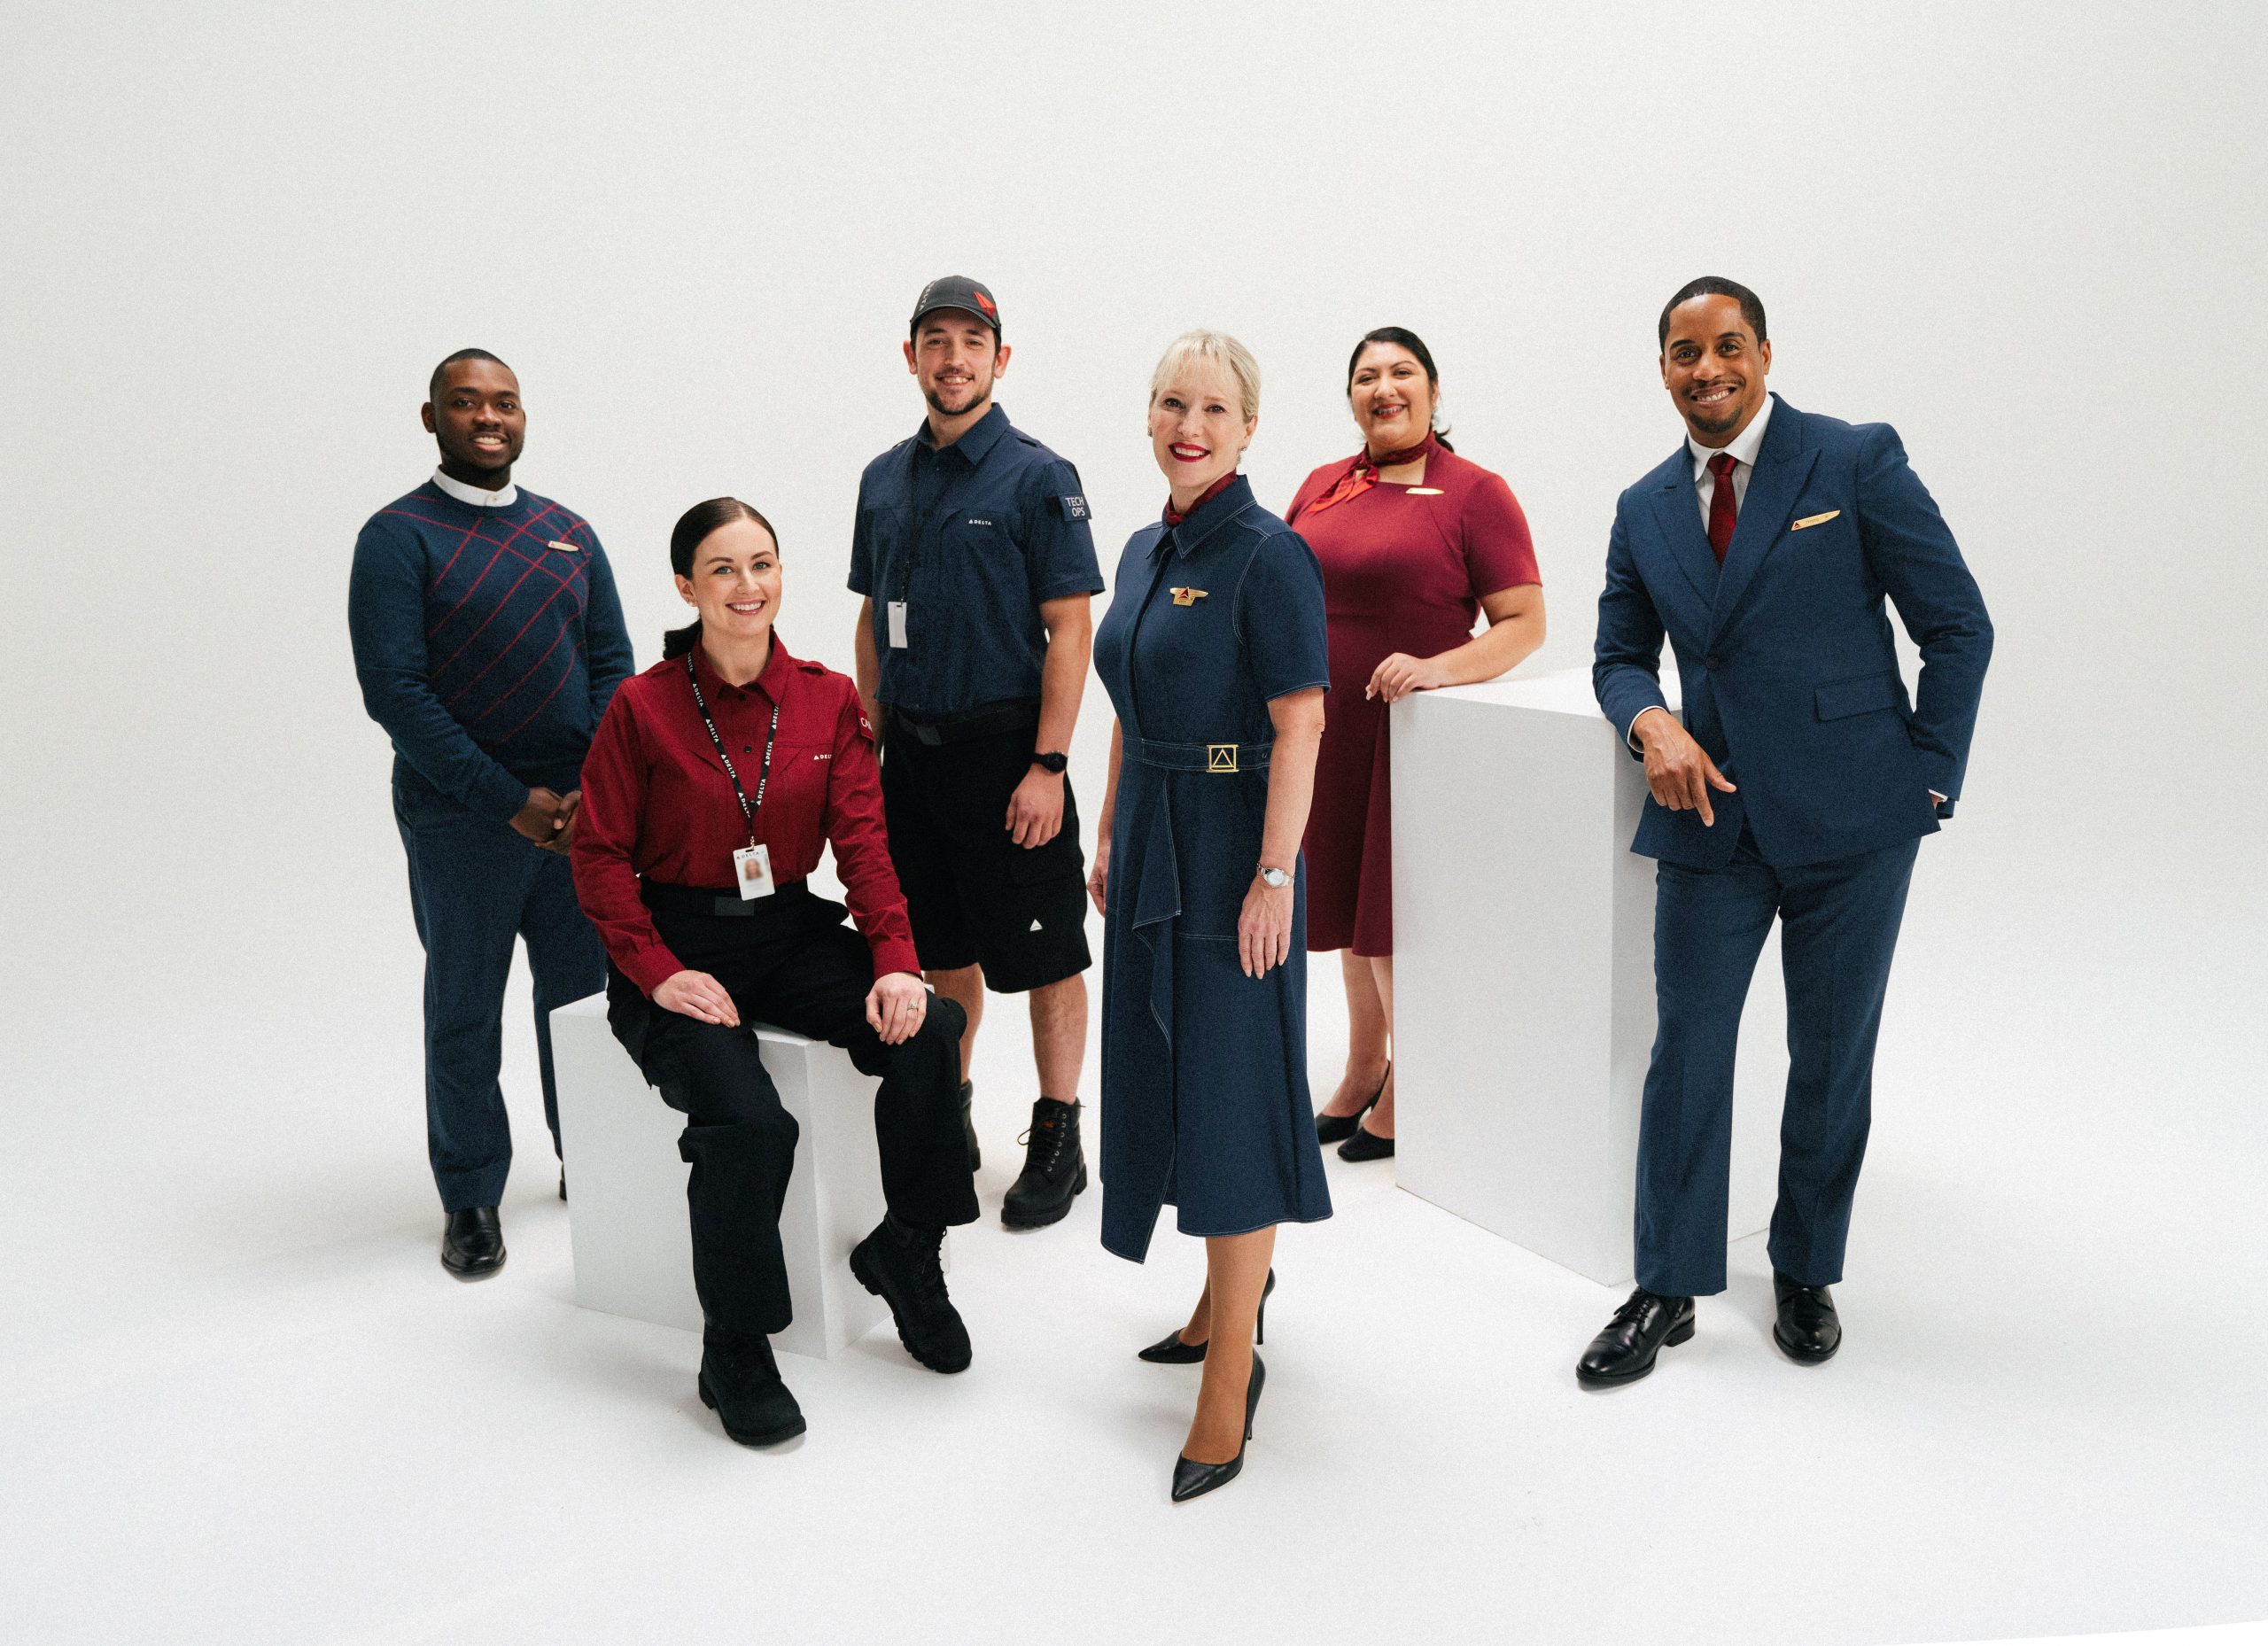 Delta employees get a sneak peek at new uniform prototypes designed with their feedback